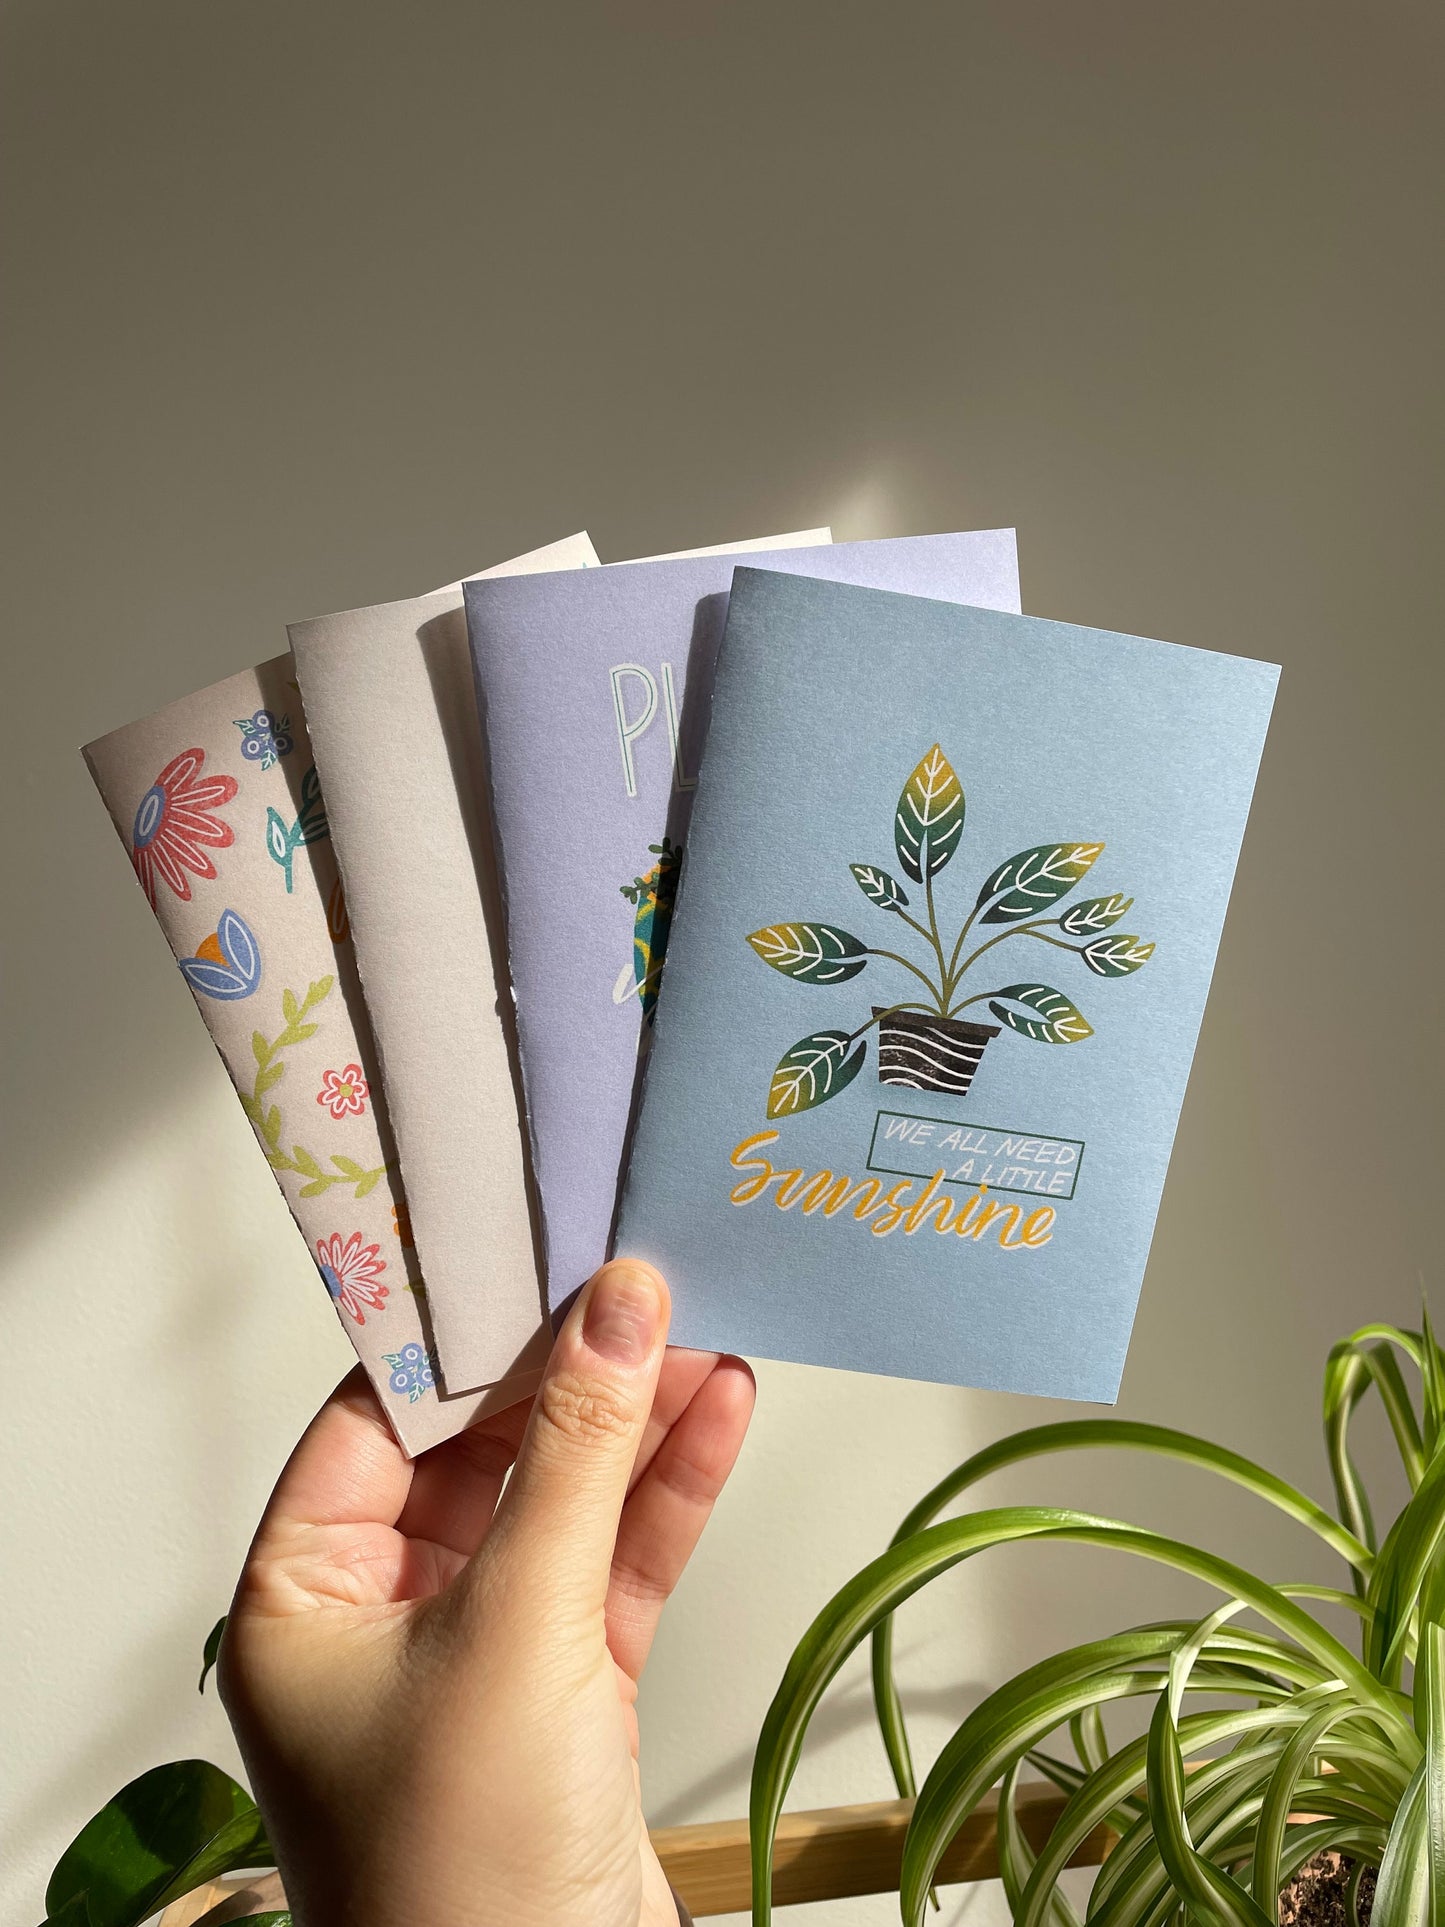 We All Need A Little Sunshine - Greeting Card